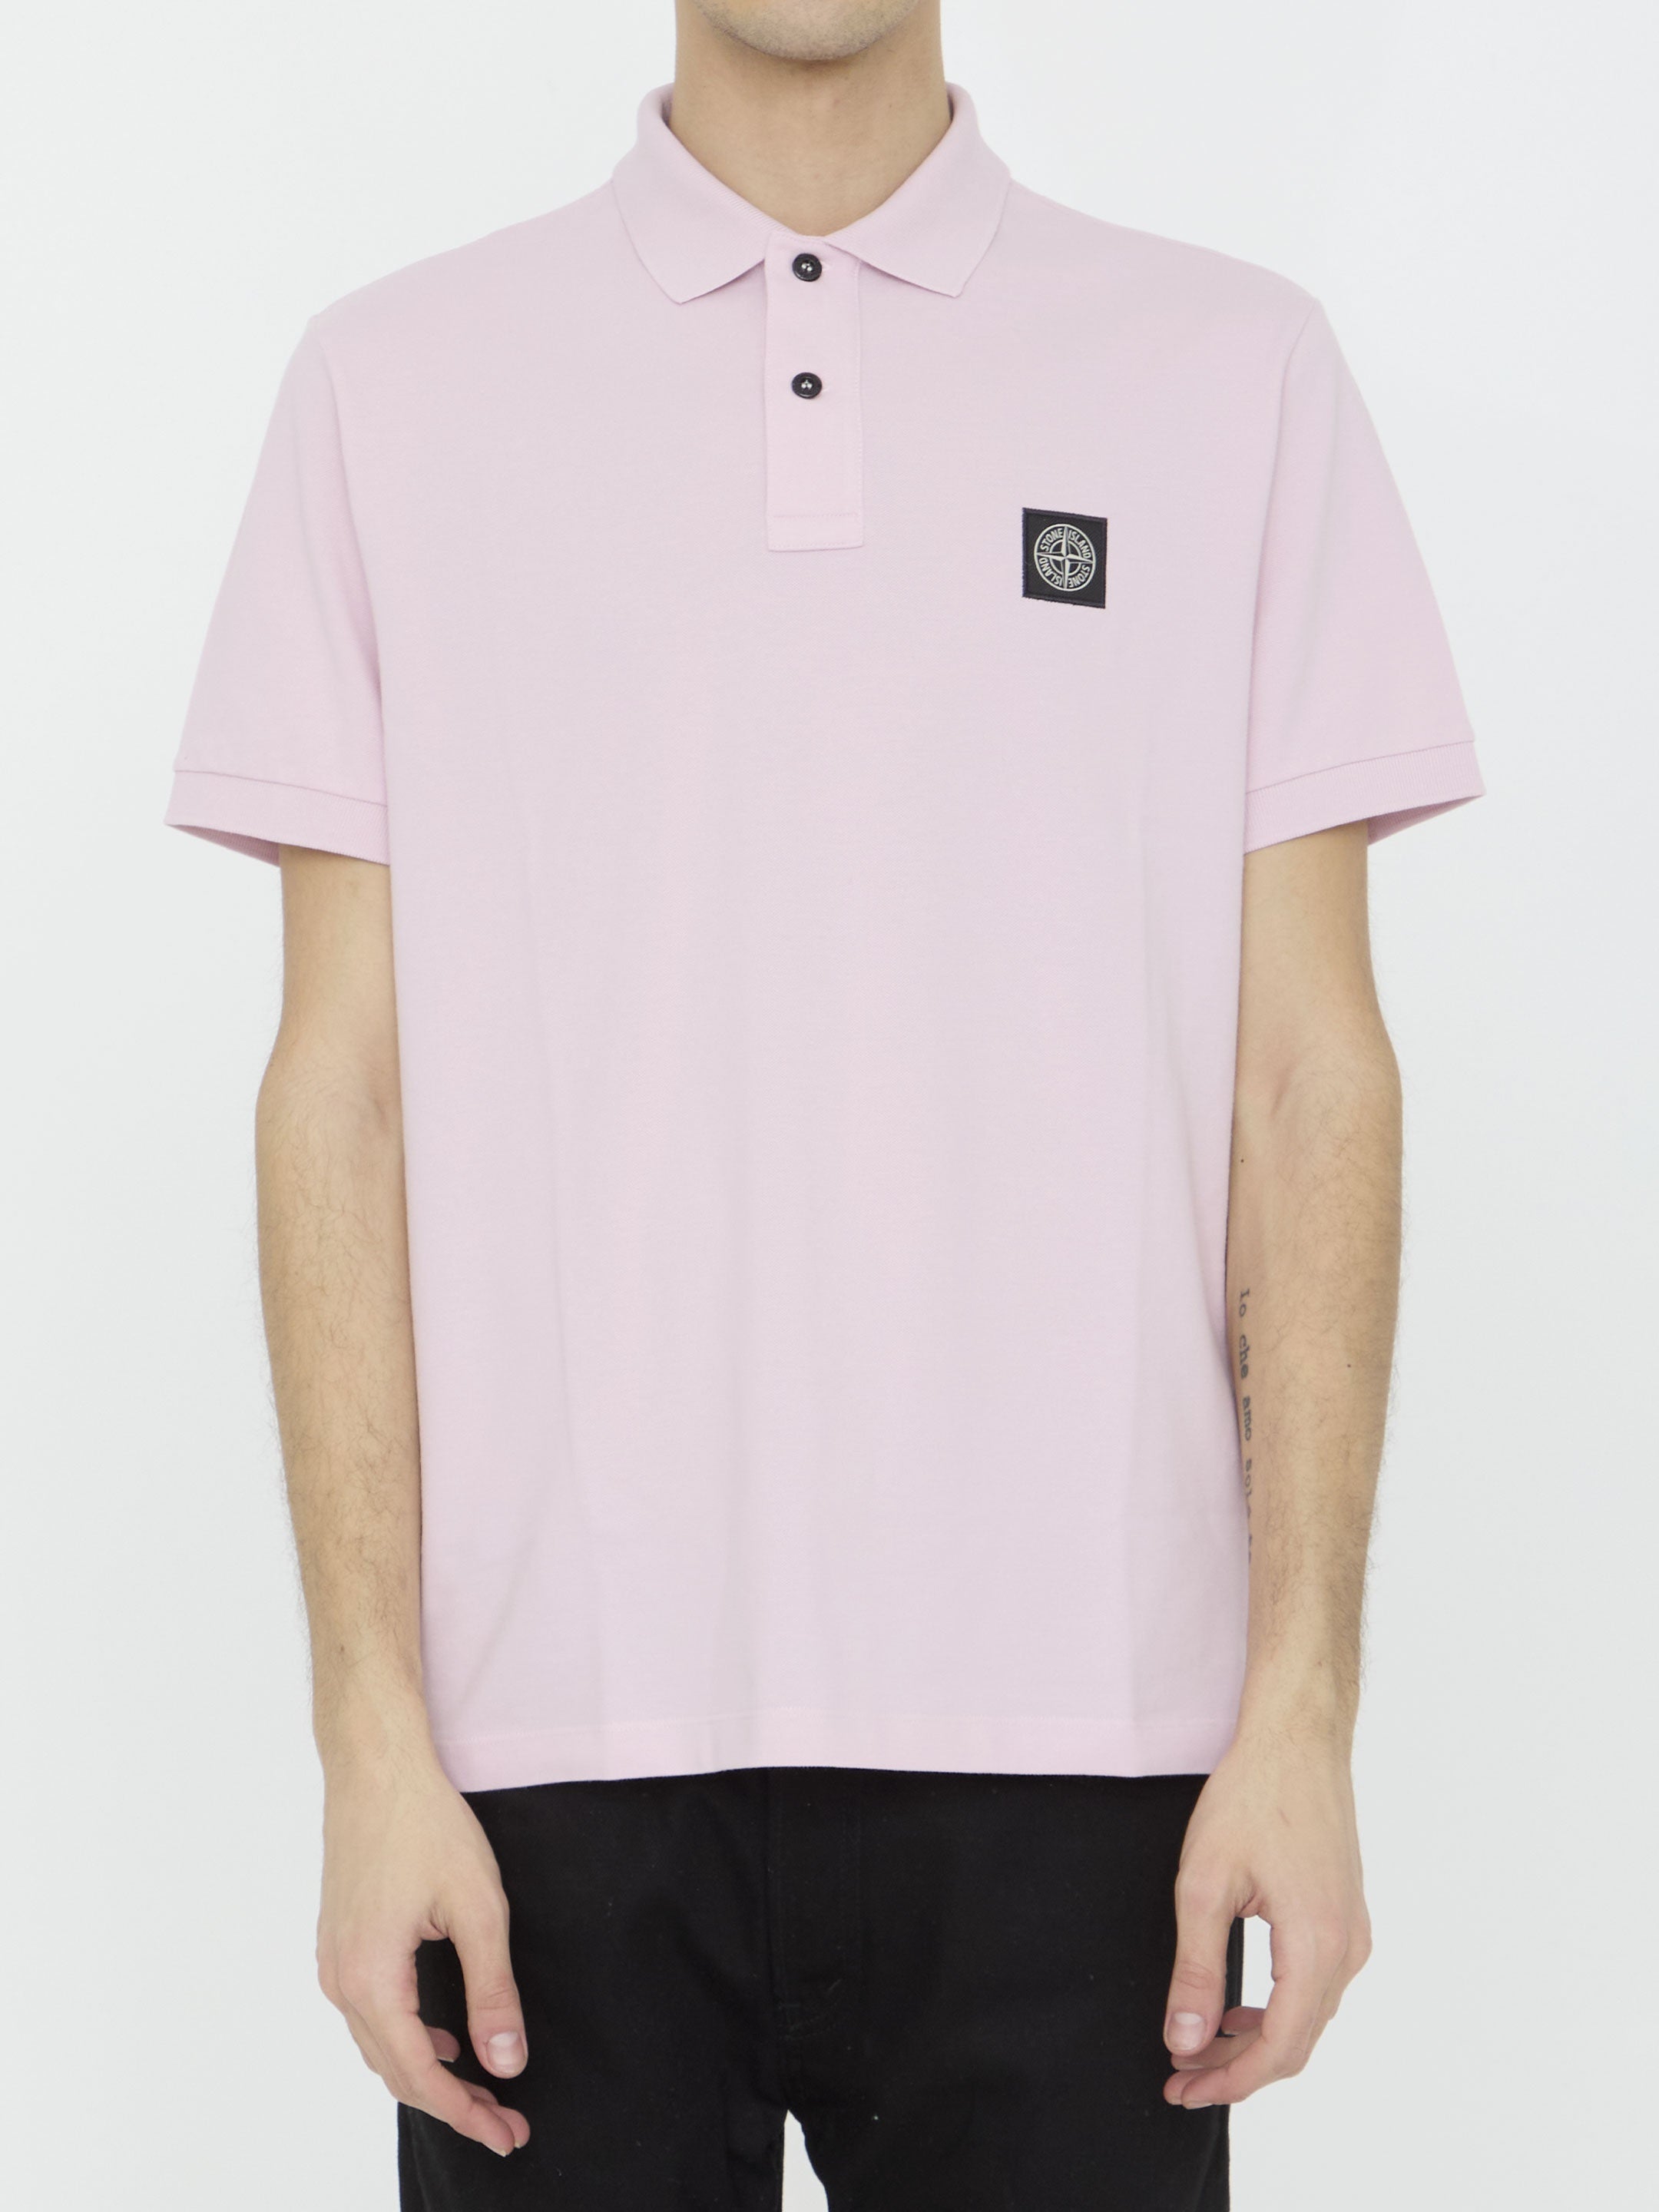 STONE-ISLAND-OUTLET-SALE-Cotton-polo-shirt-Shirts-L-PINK-ARCHIVE-COLLECTION.jpg